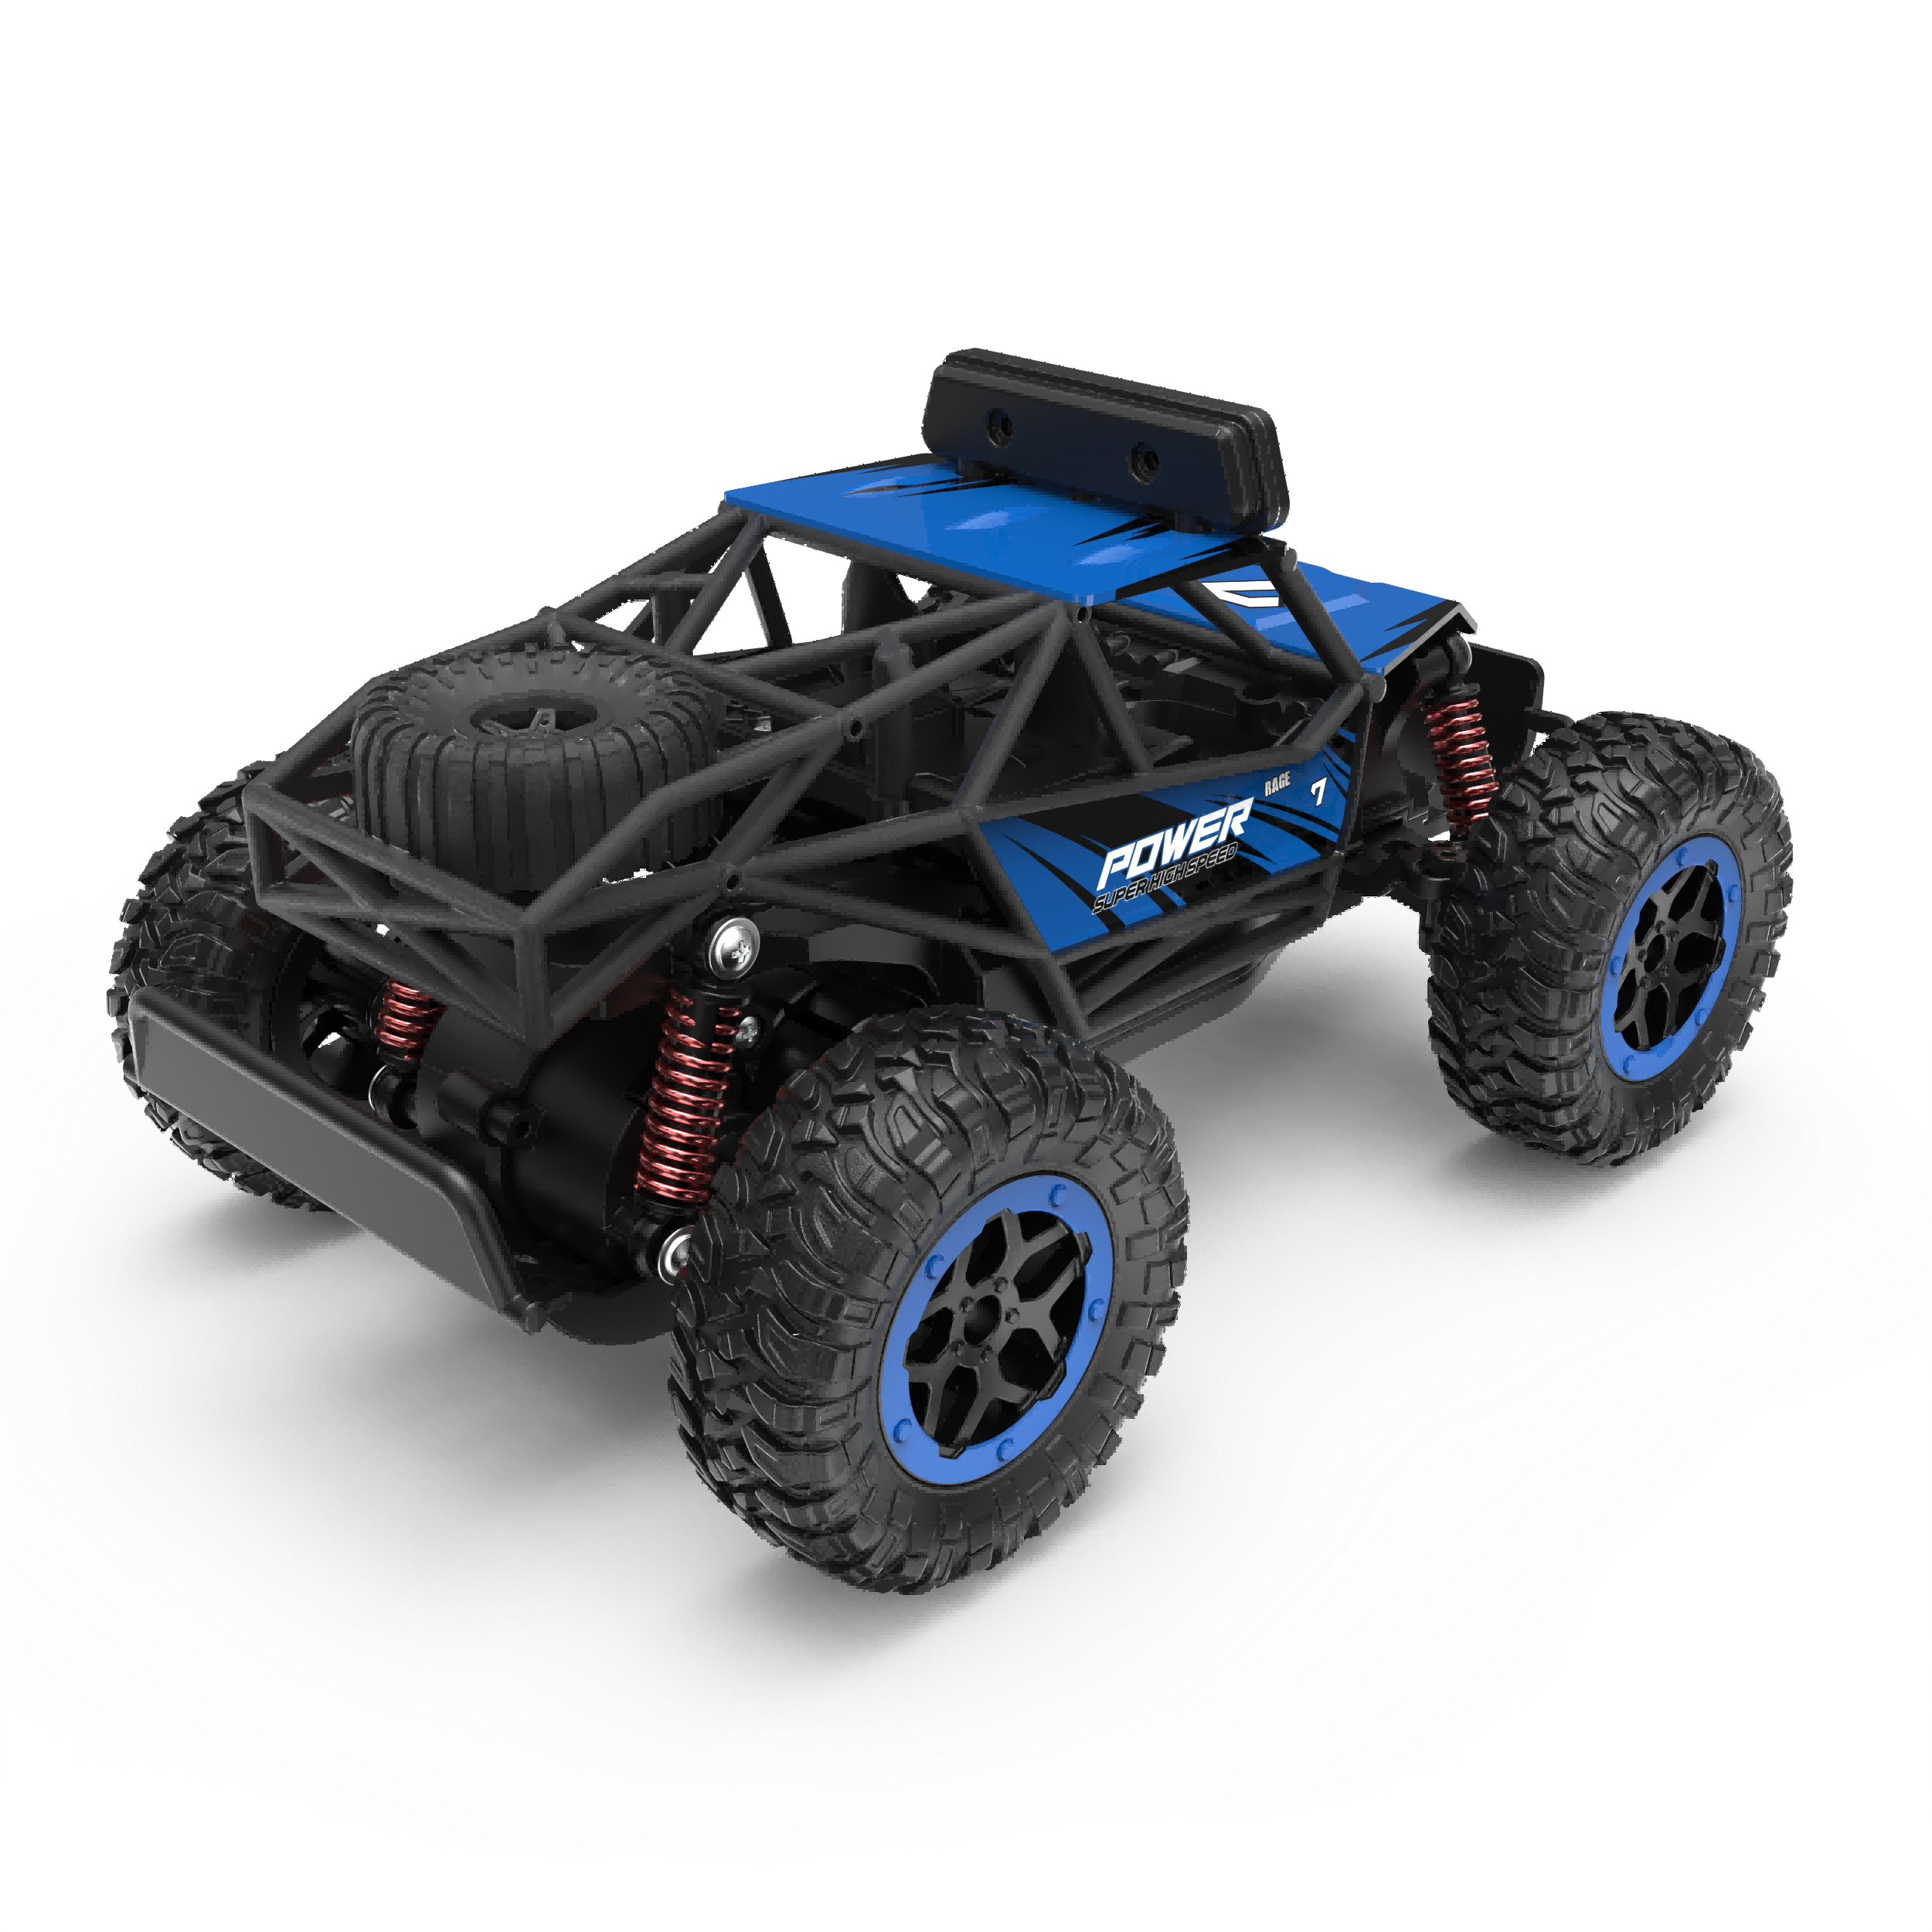  HAIBOXING 1:12 Scale RC Cars 903 RC Monster Truck, 38 km/h  Speed Hobby Fast RC Cars for Kids and Adults Toy Gifts, 2.4 GHz 4WD  Electric Powered Remote Control Trucks Ready